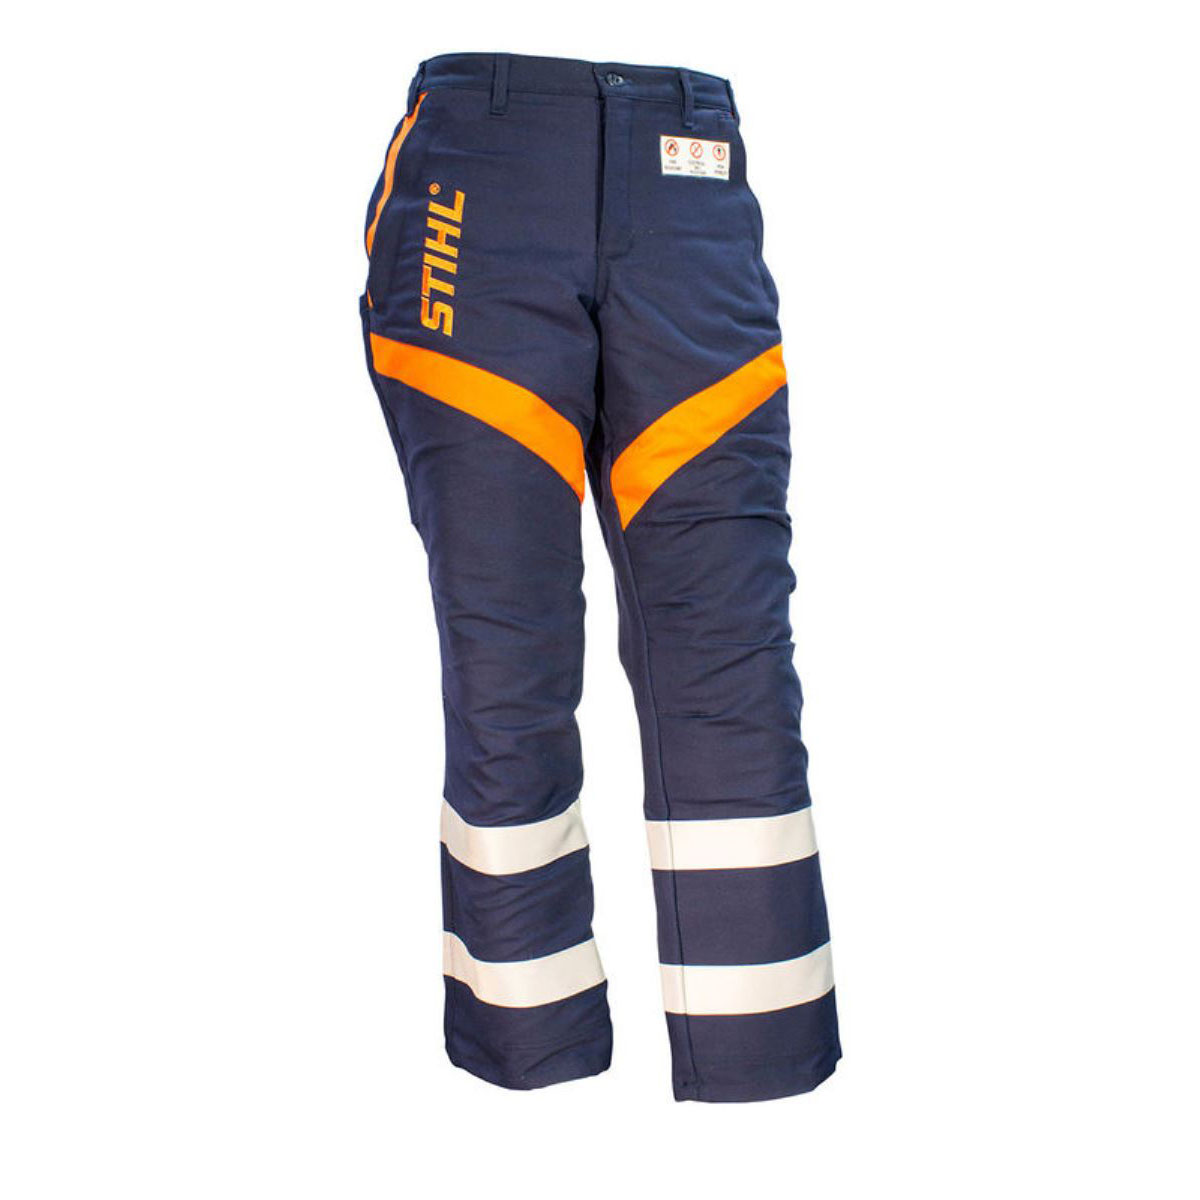 Government + Utility Protective Pants   Navy Blue